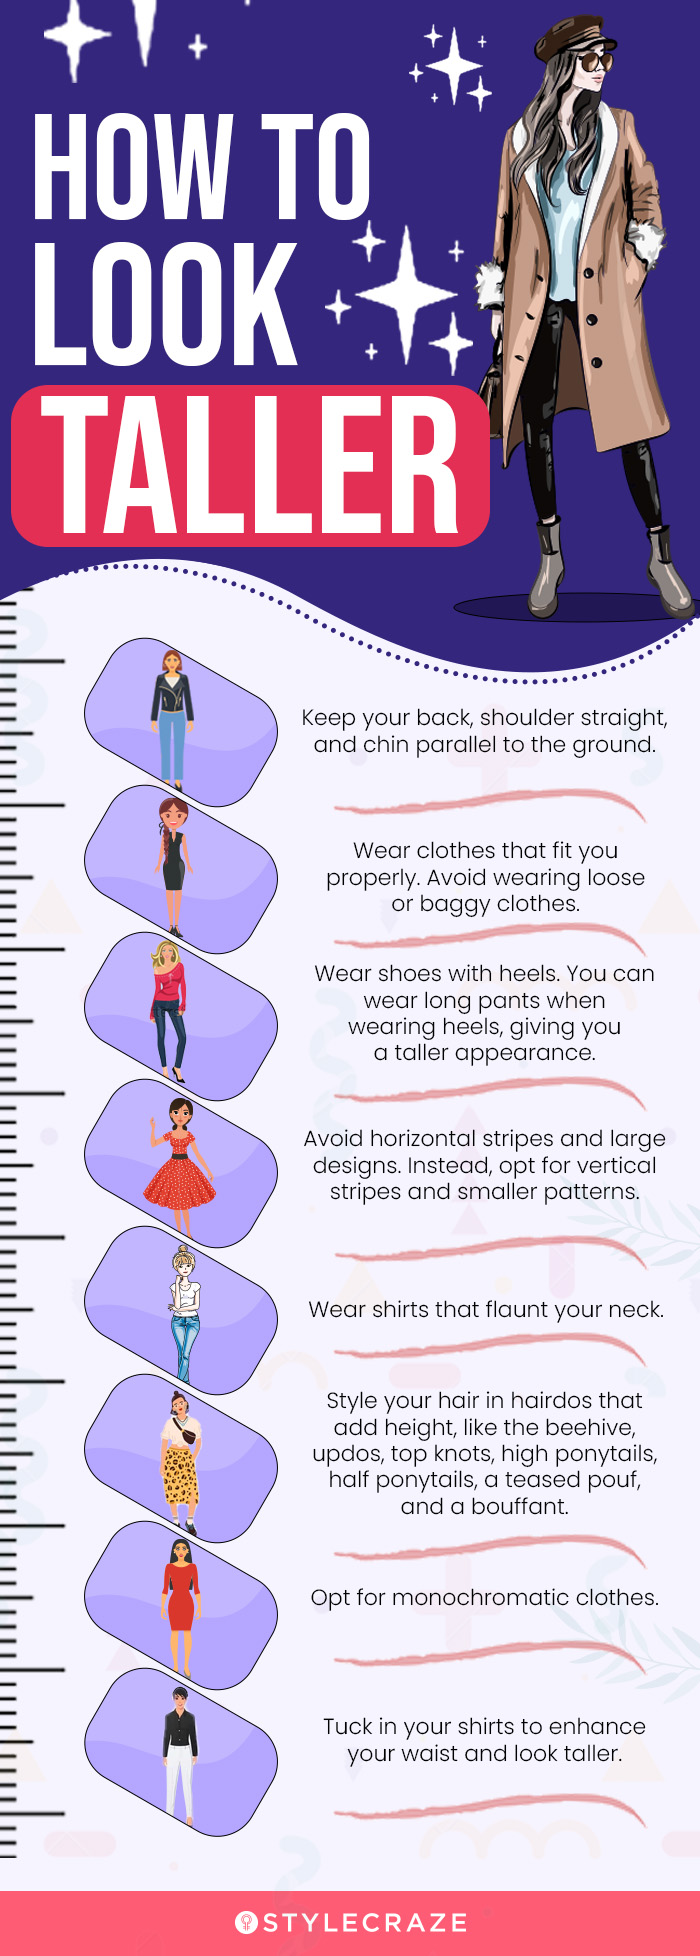 how to look taller [infographic]